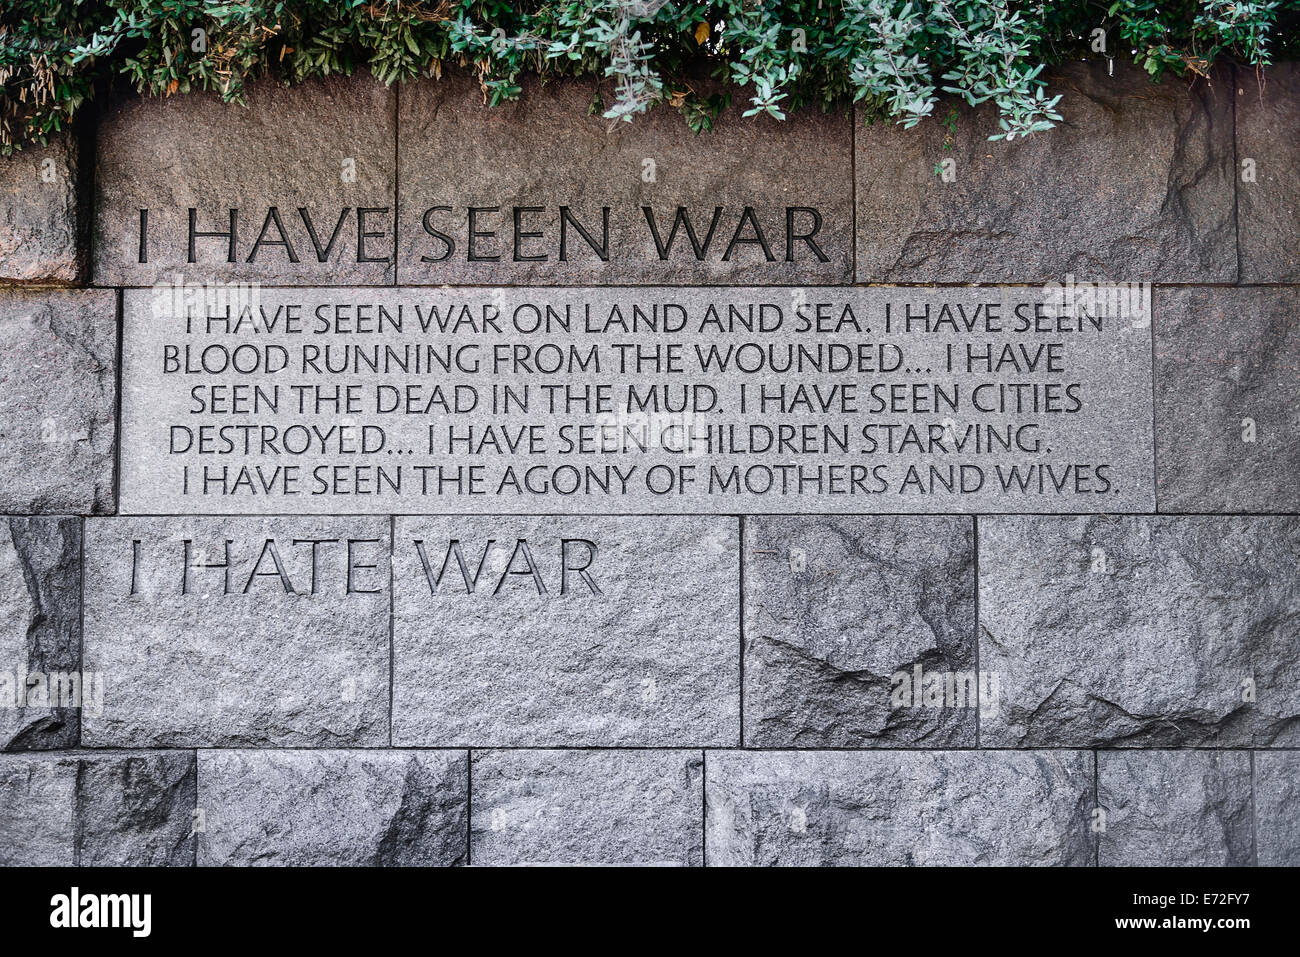 USA, Washington DC, National Mall  President Franklin Delano Roosevelt Memorial  Mural with inscription detailing the former Presidents feelings about war. Stock Photo